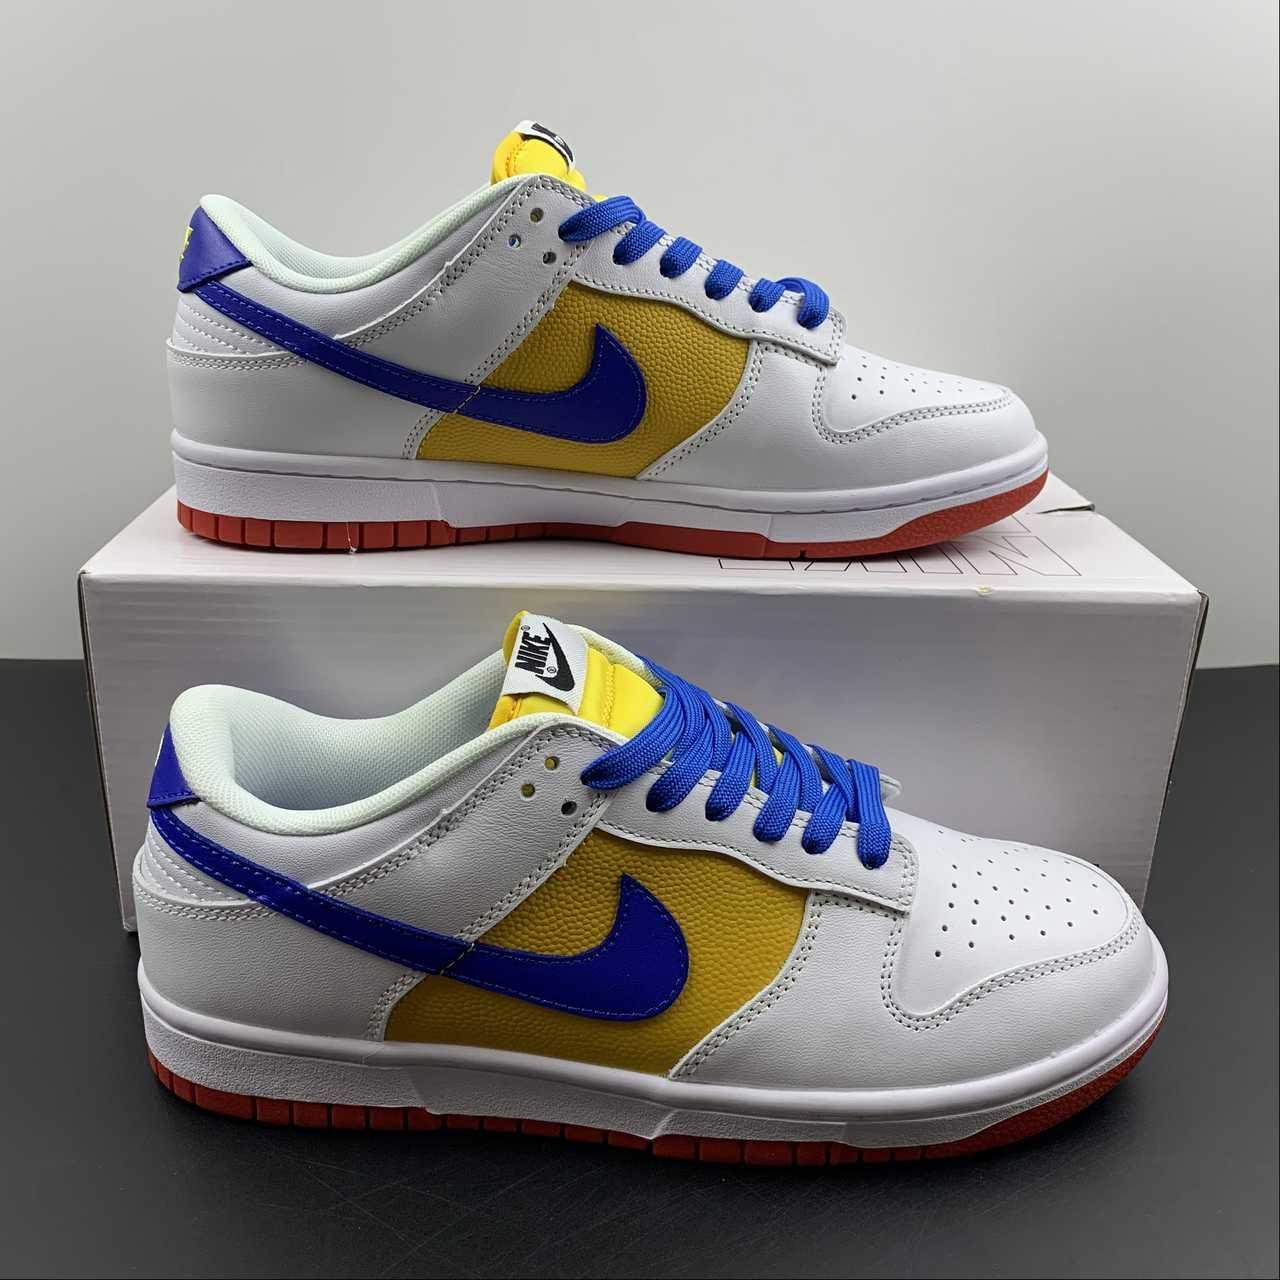 2022      shoes Company level SB Dunk Low Top sneakers AH7999-992